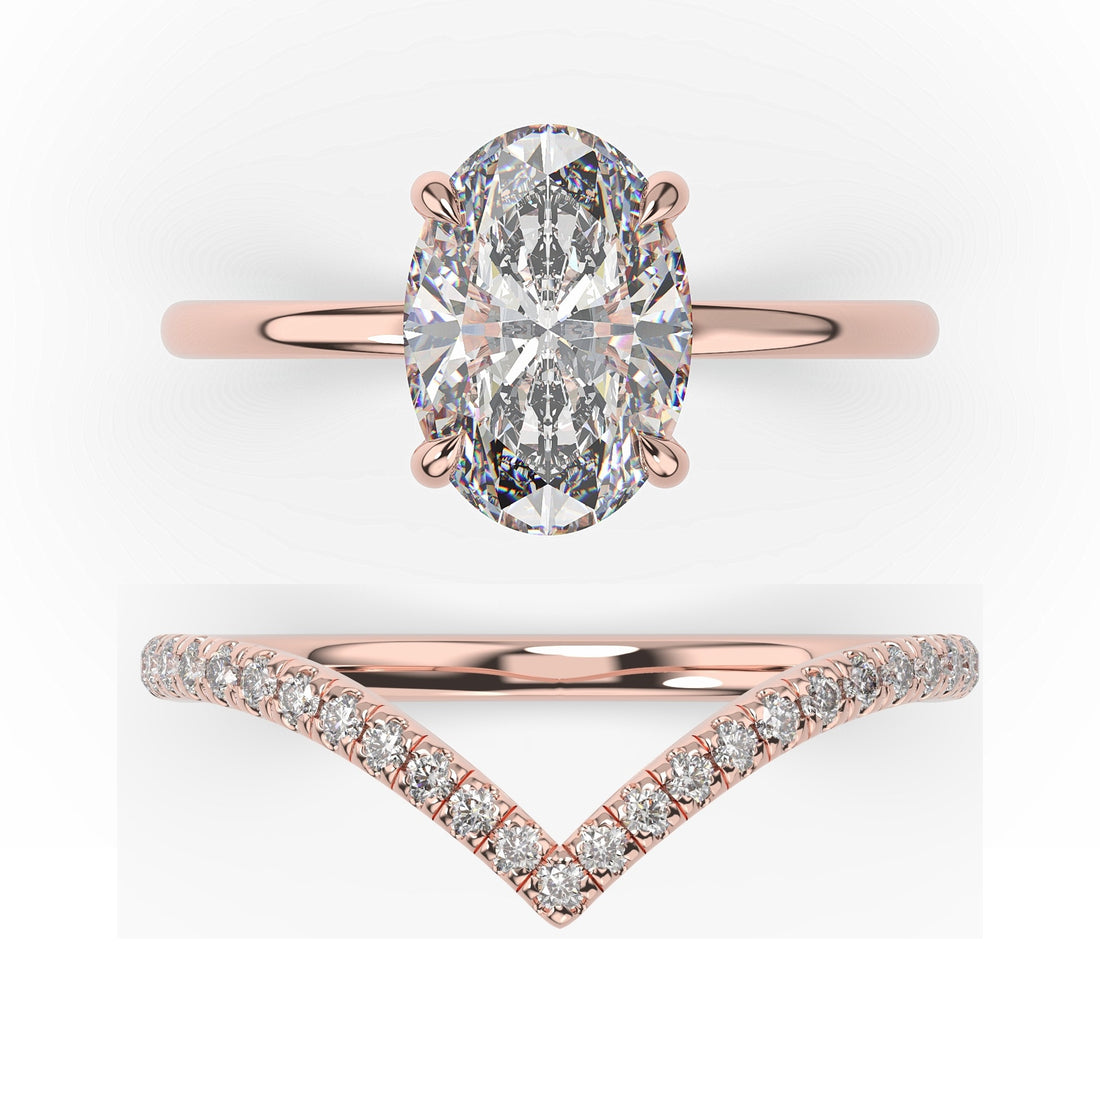 Thin Band Engagement Rings...How Thin Is Too Thin?